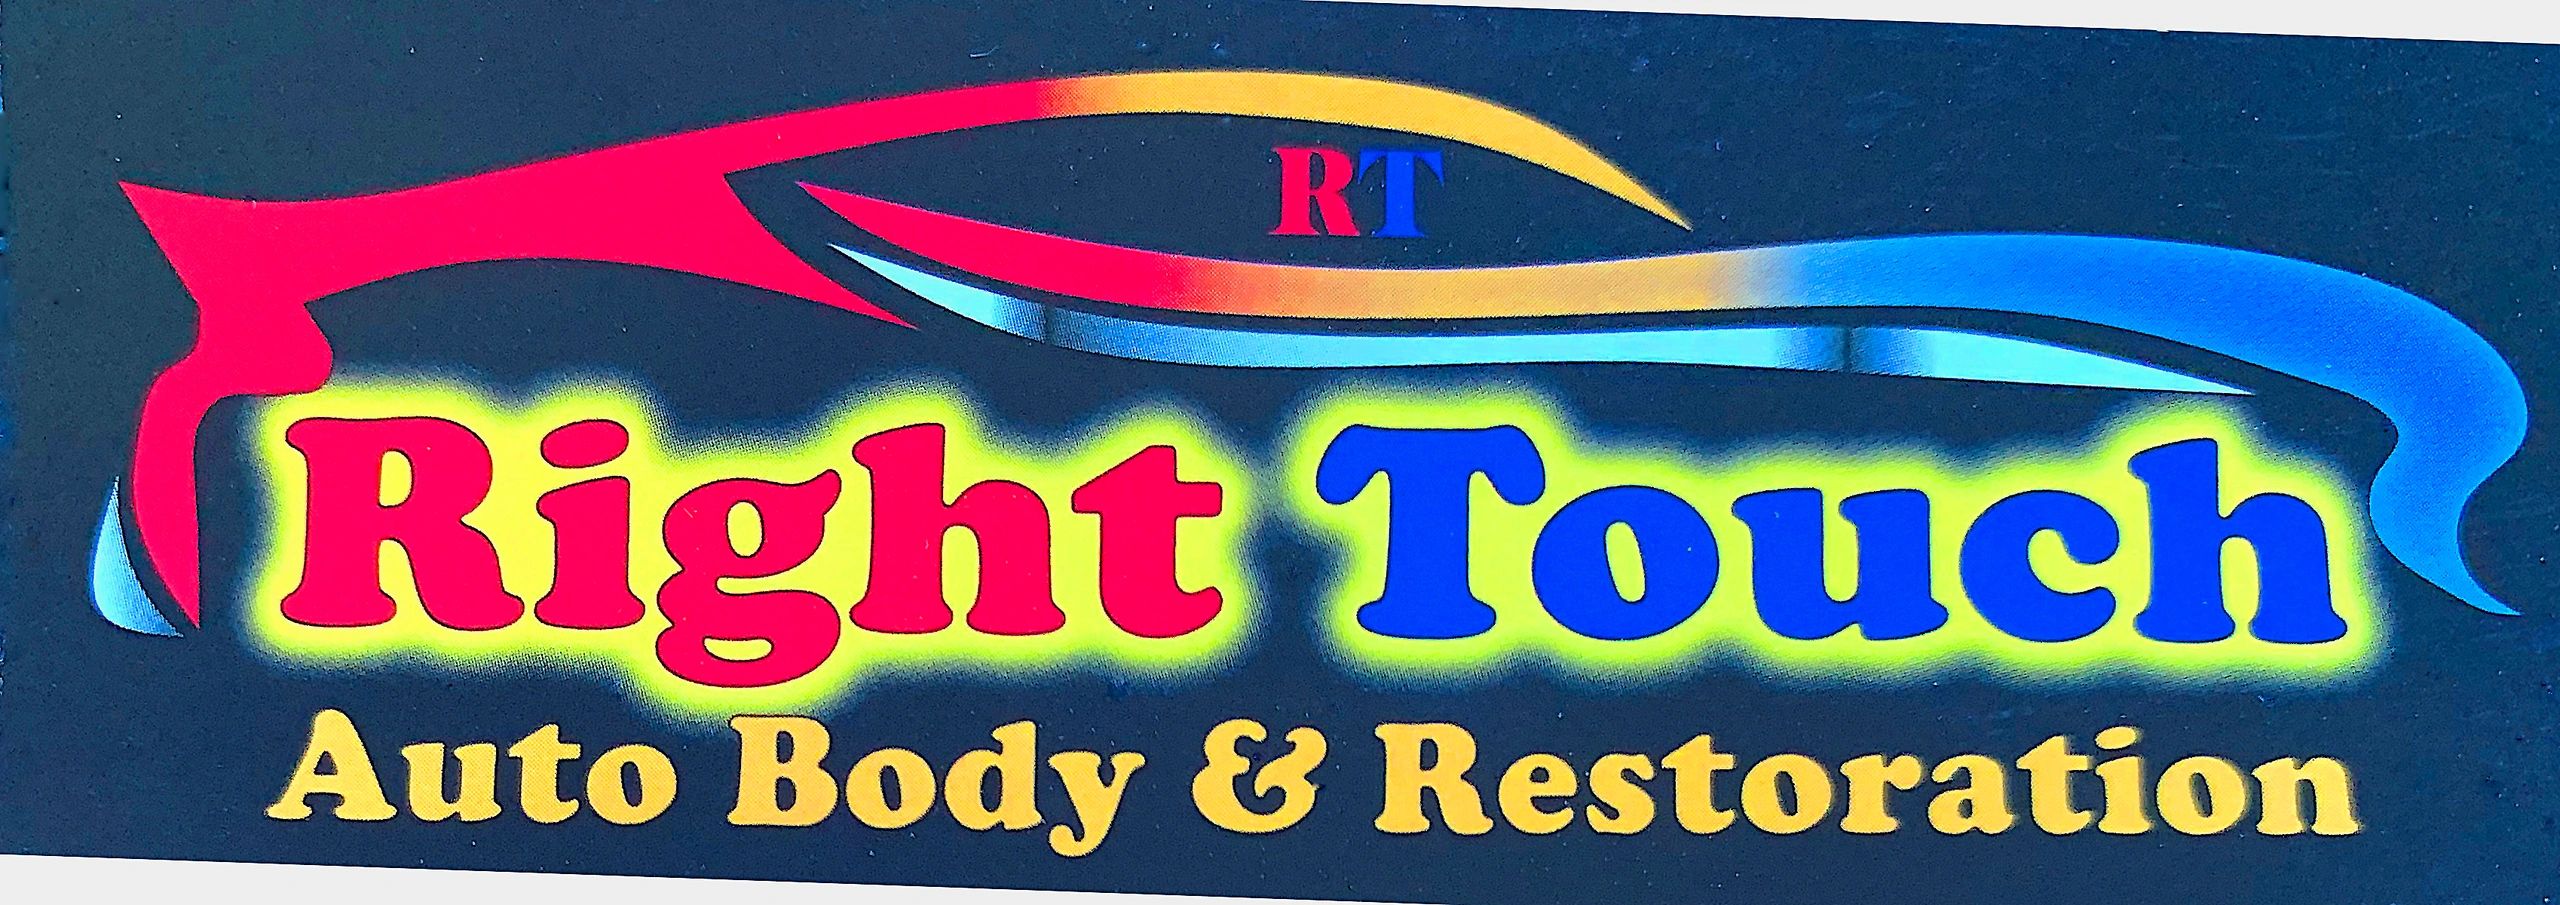 RIGHT TOUCH AUTOBODY, ALSO KNOWN AS R&T AUTOBODY